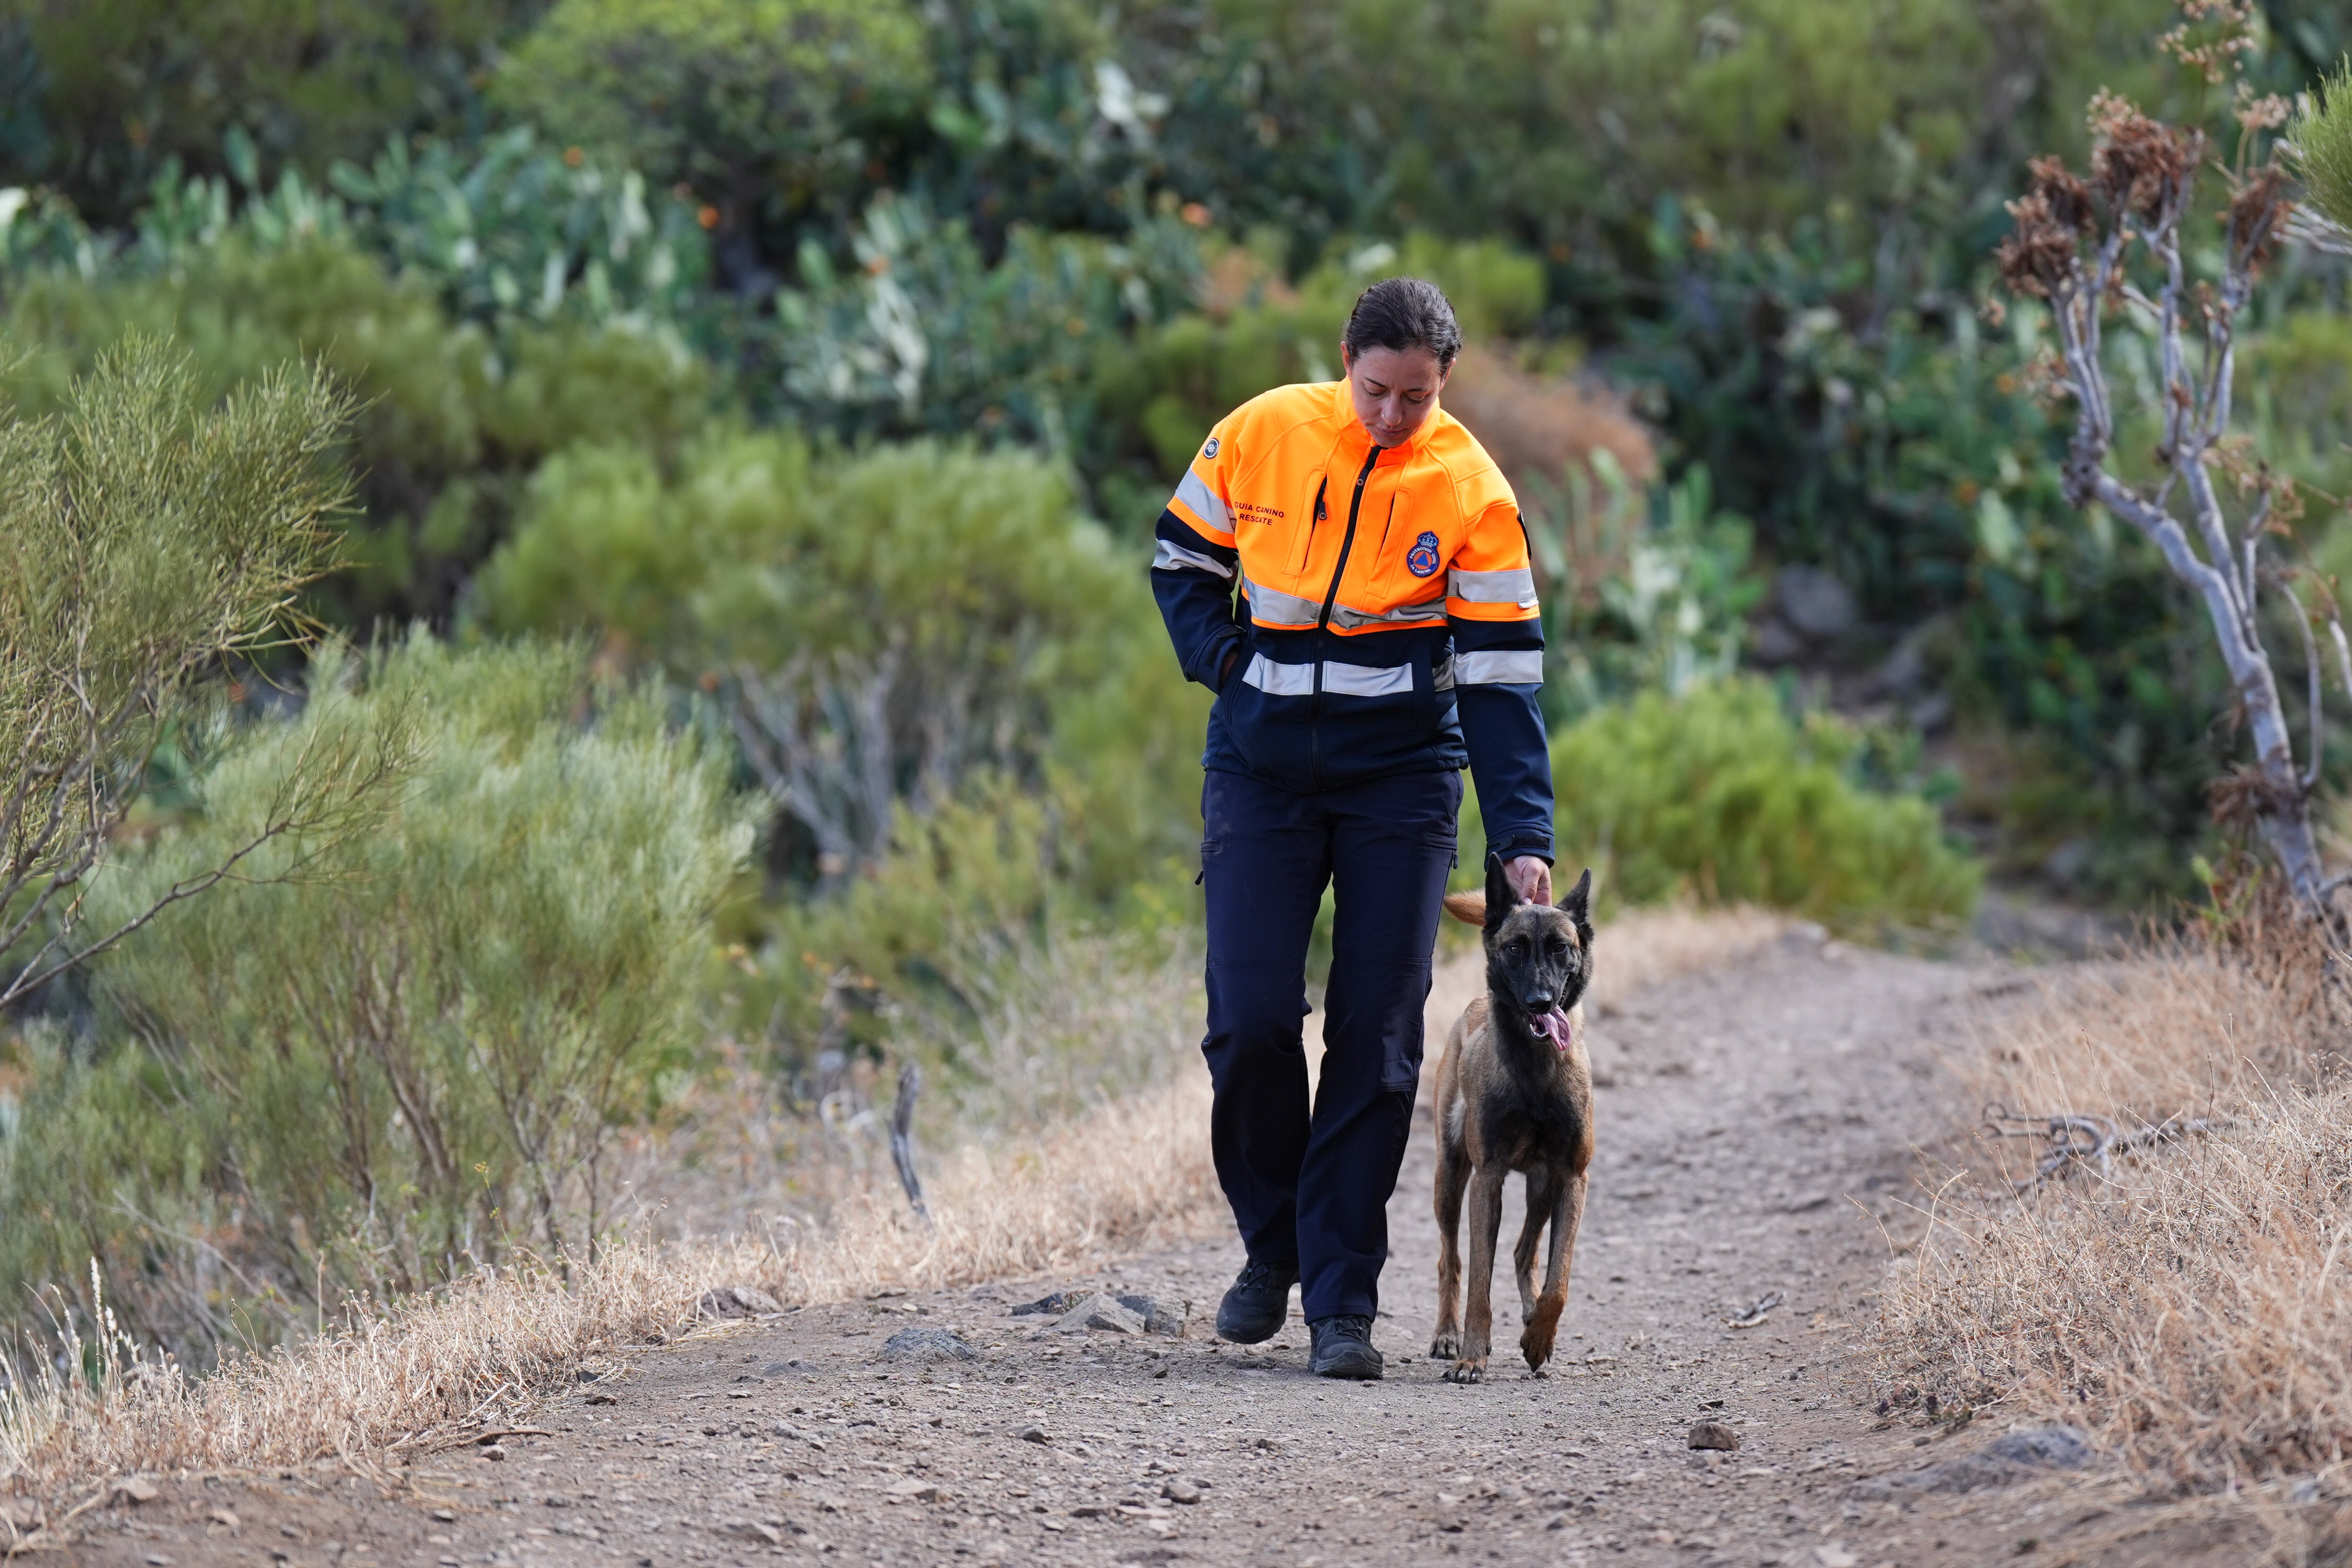 A search team member with a search dog near the village of Masca, Tenerife on Saturday